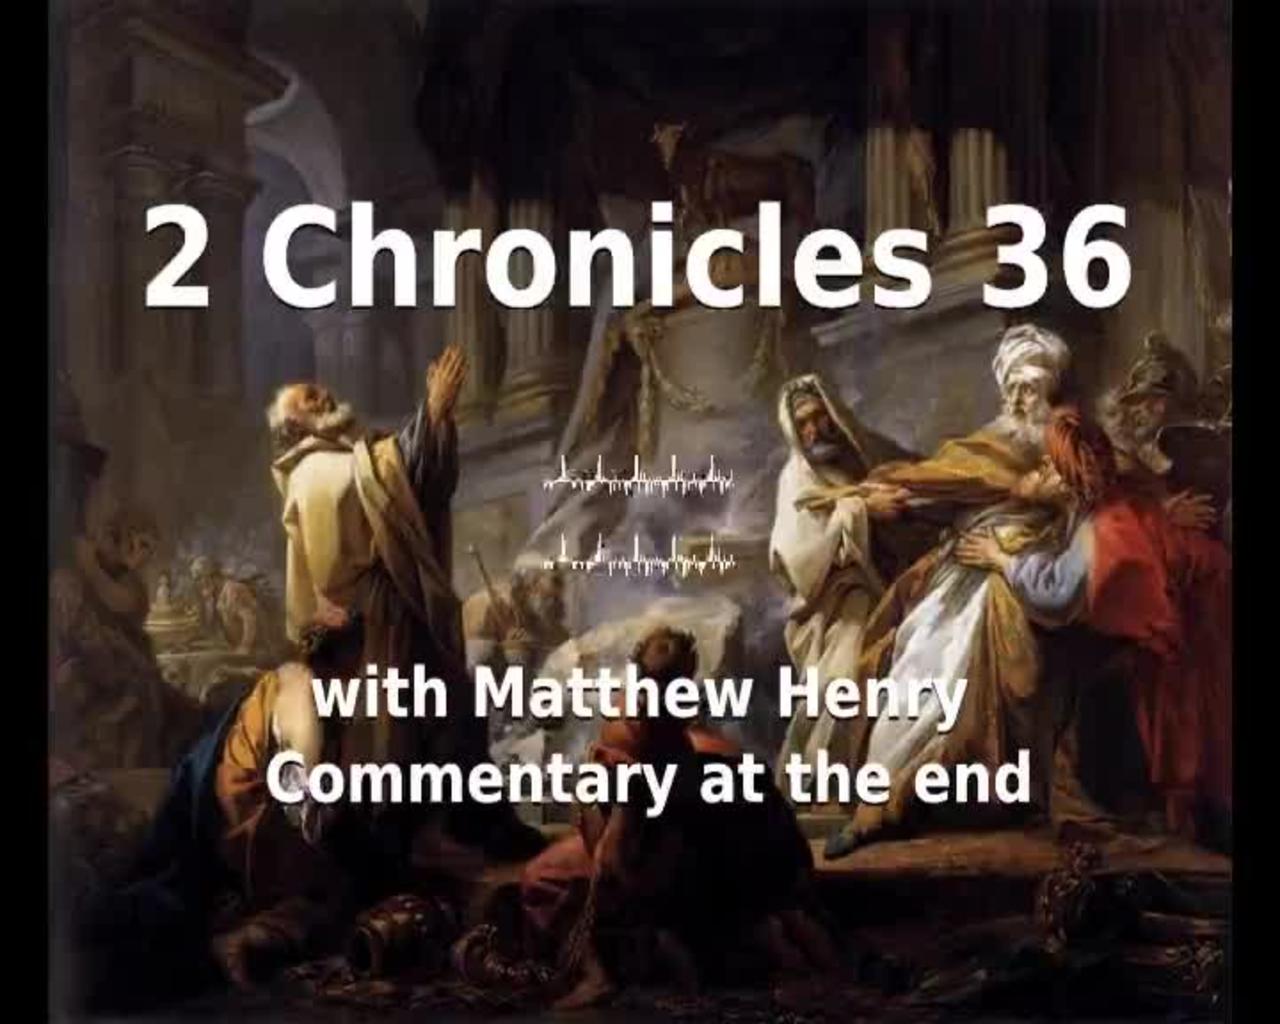 📖🕯 Holy Bible - 2 Chronicles 36 with Matthew Henry Commentary at the end.